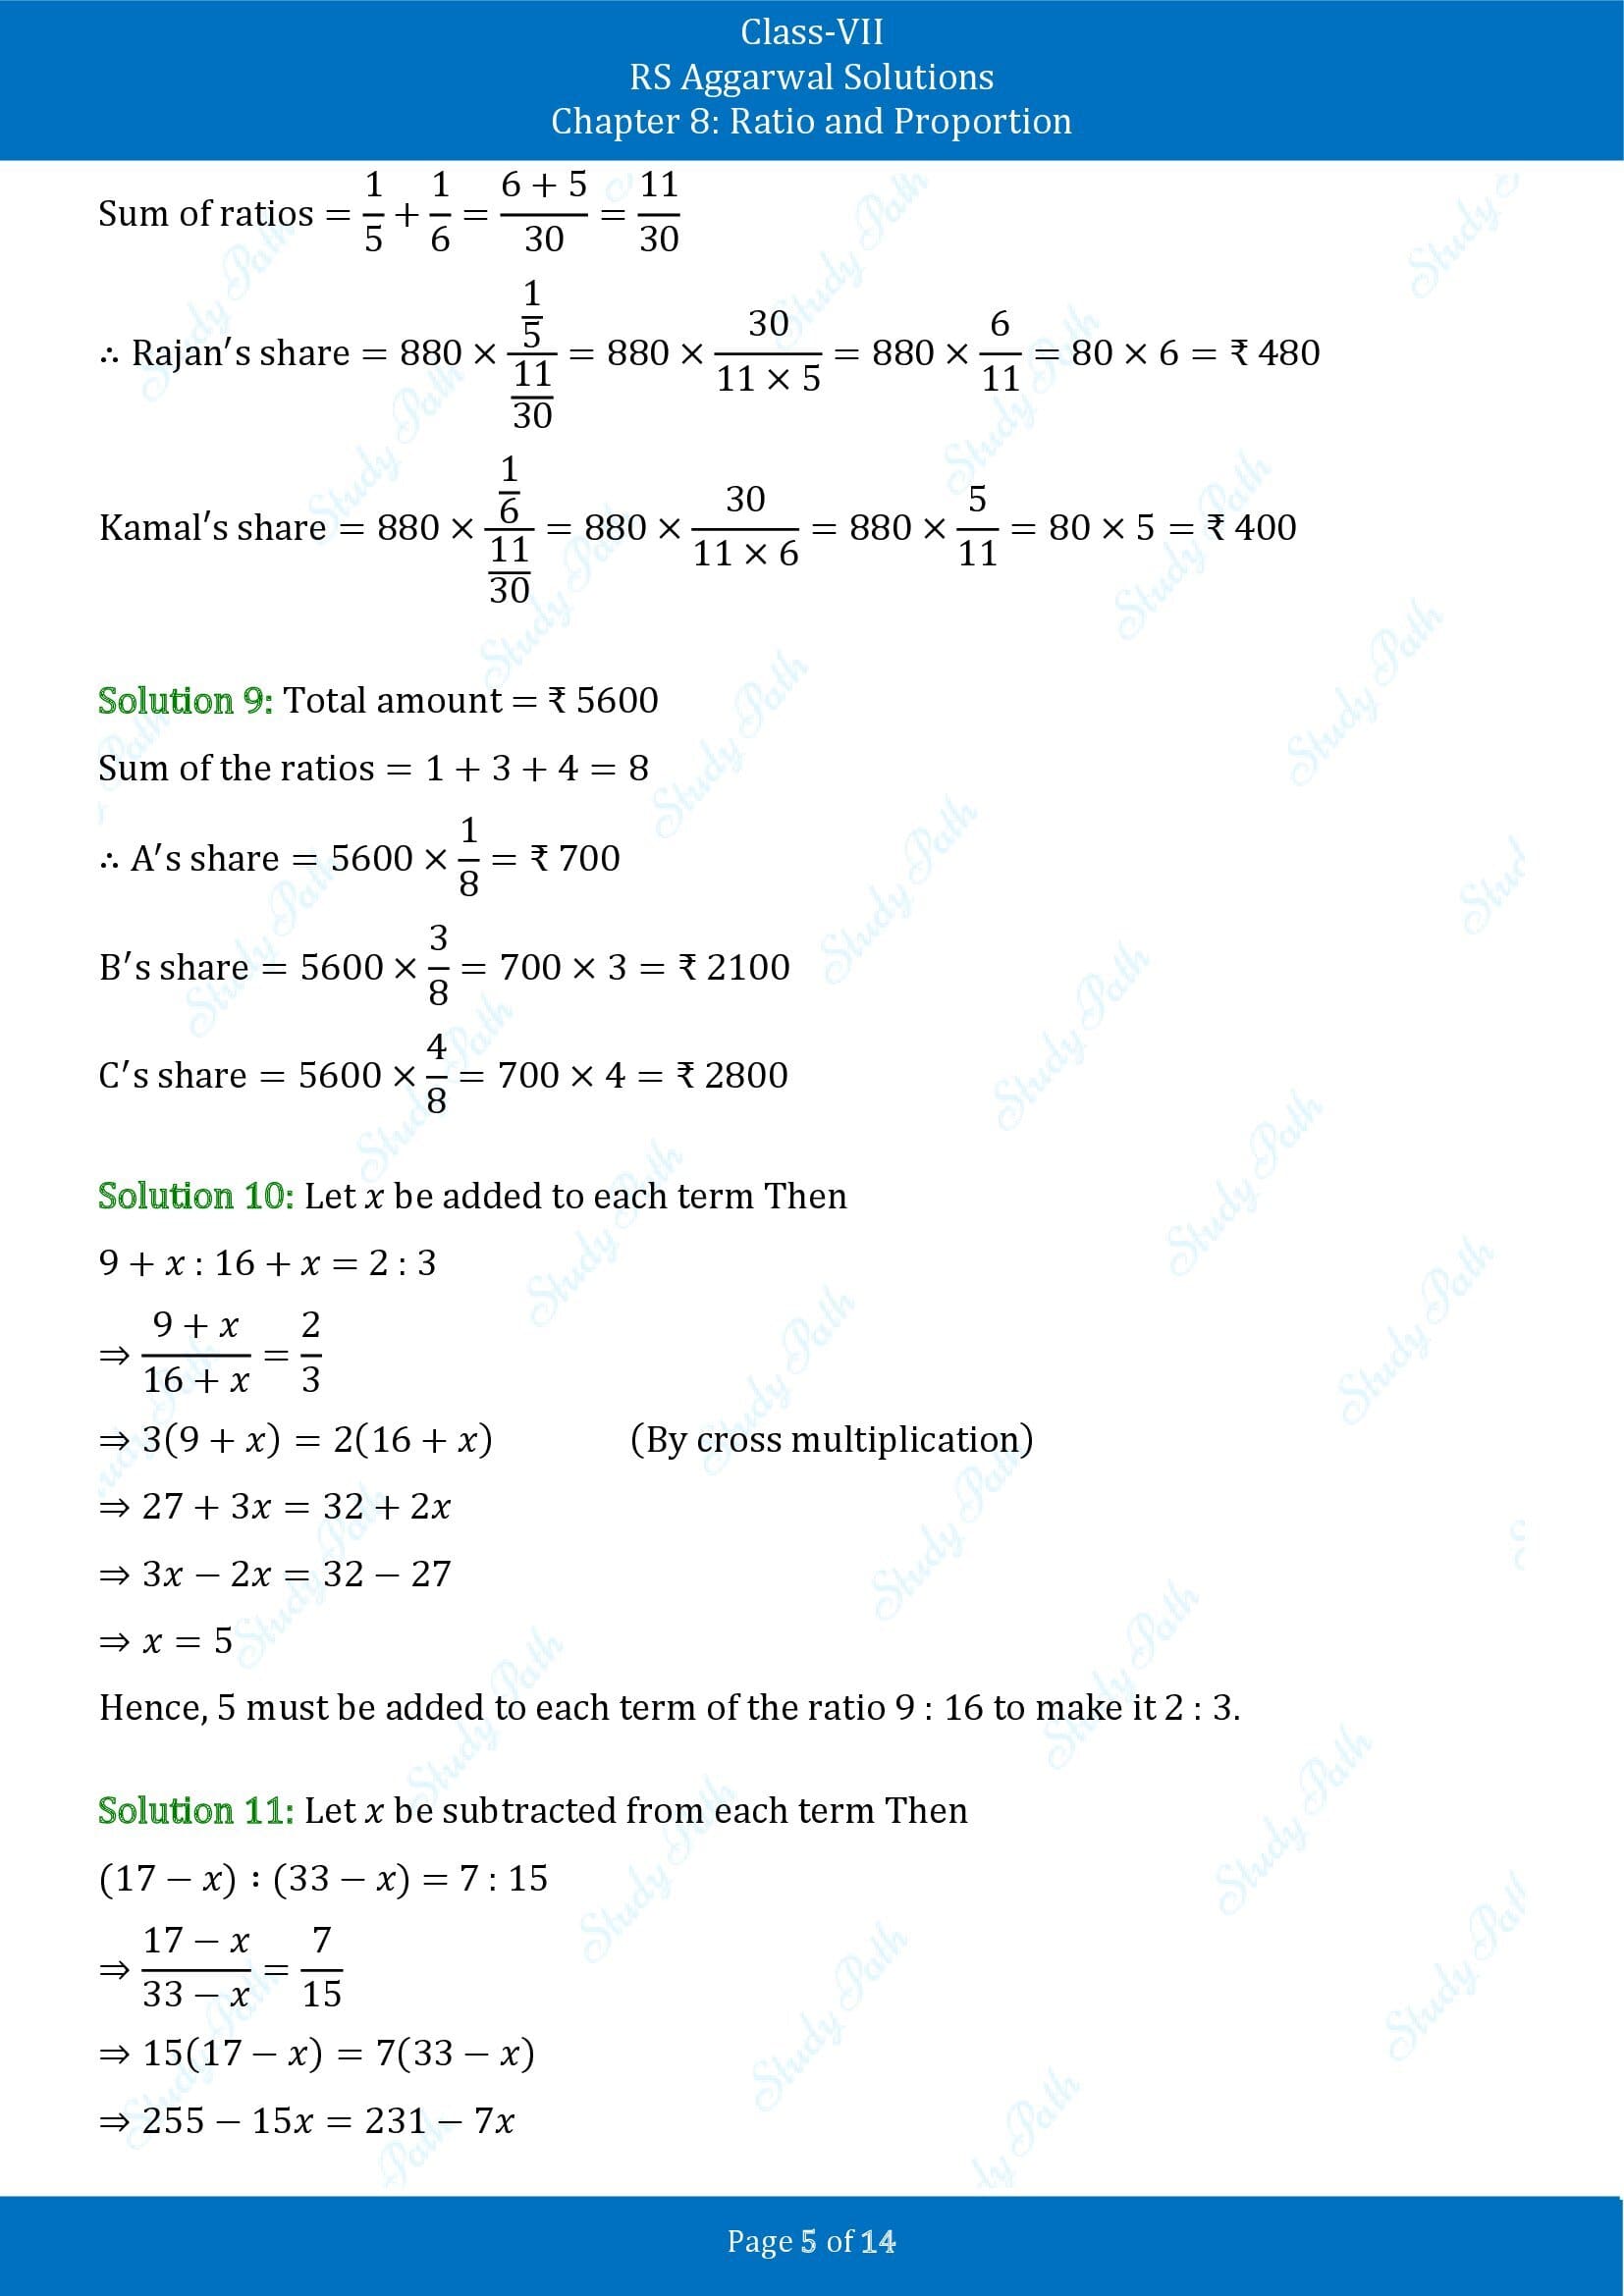 RS Aggarwal Solutions Class 7 Chapter 8 Ratio and Proportion Exercise 8A 00005